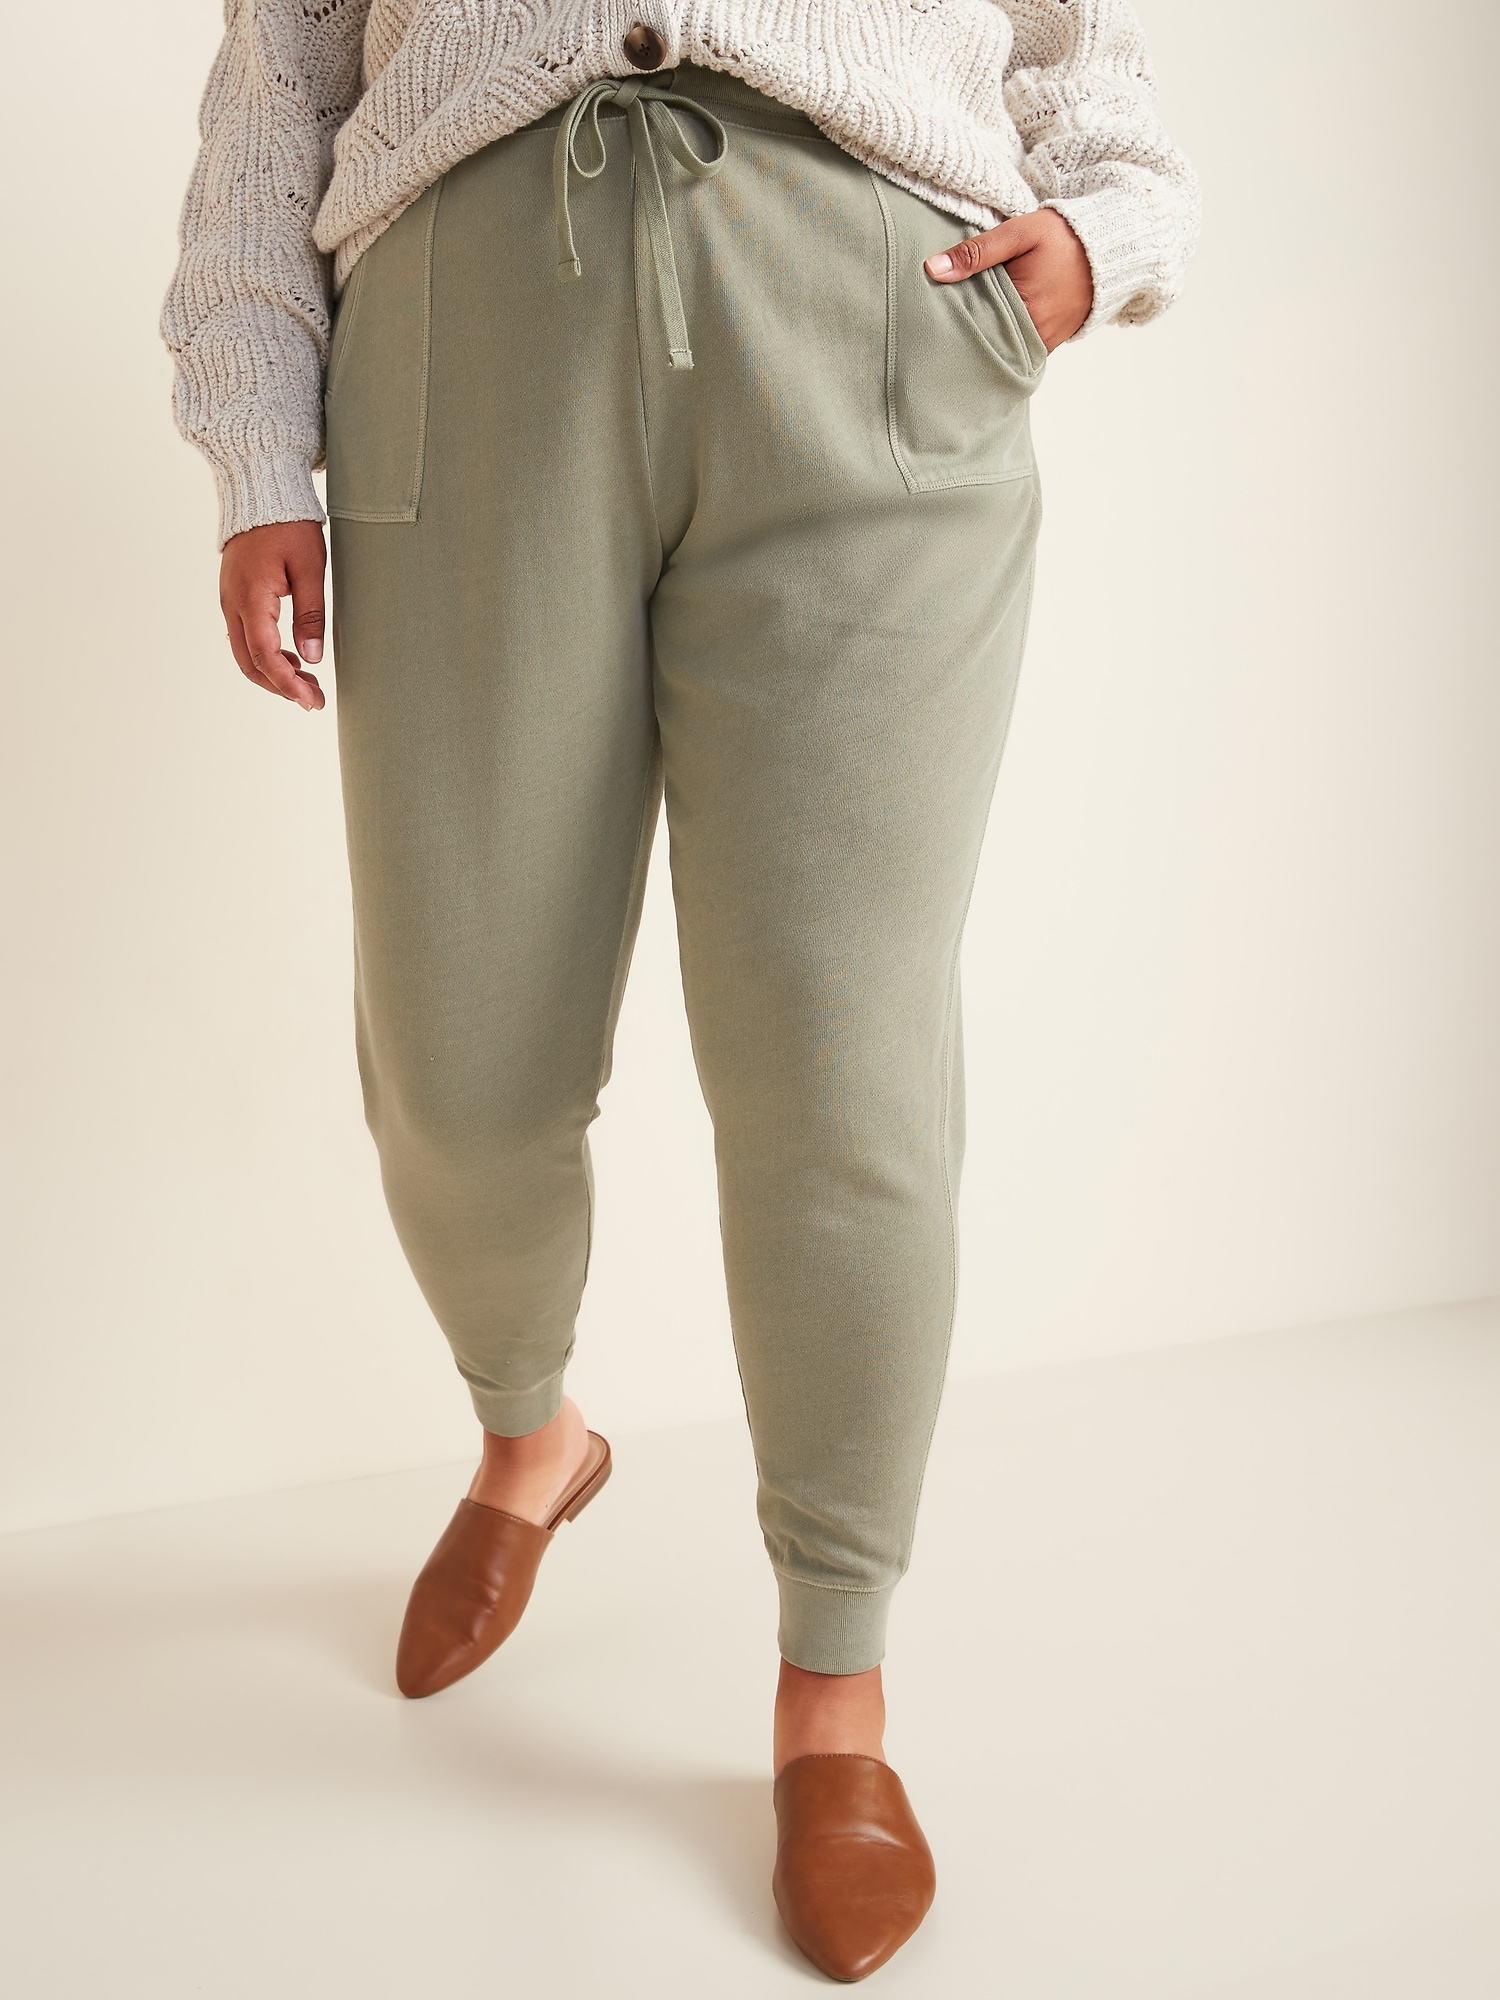 High-Waisted Garment-Dyed Utility Plus-Size Jogger Sweatpants